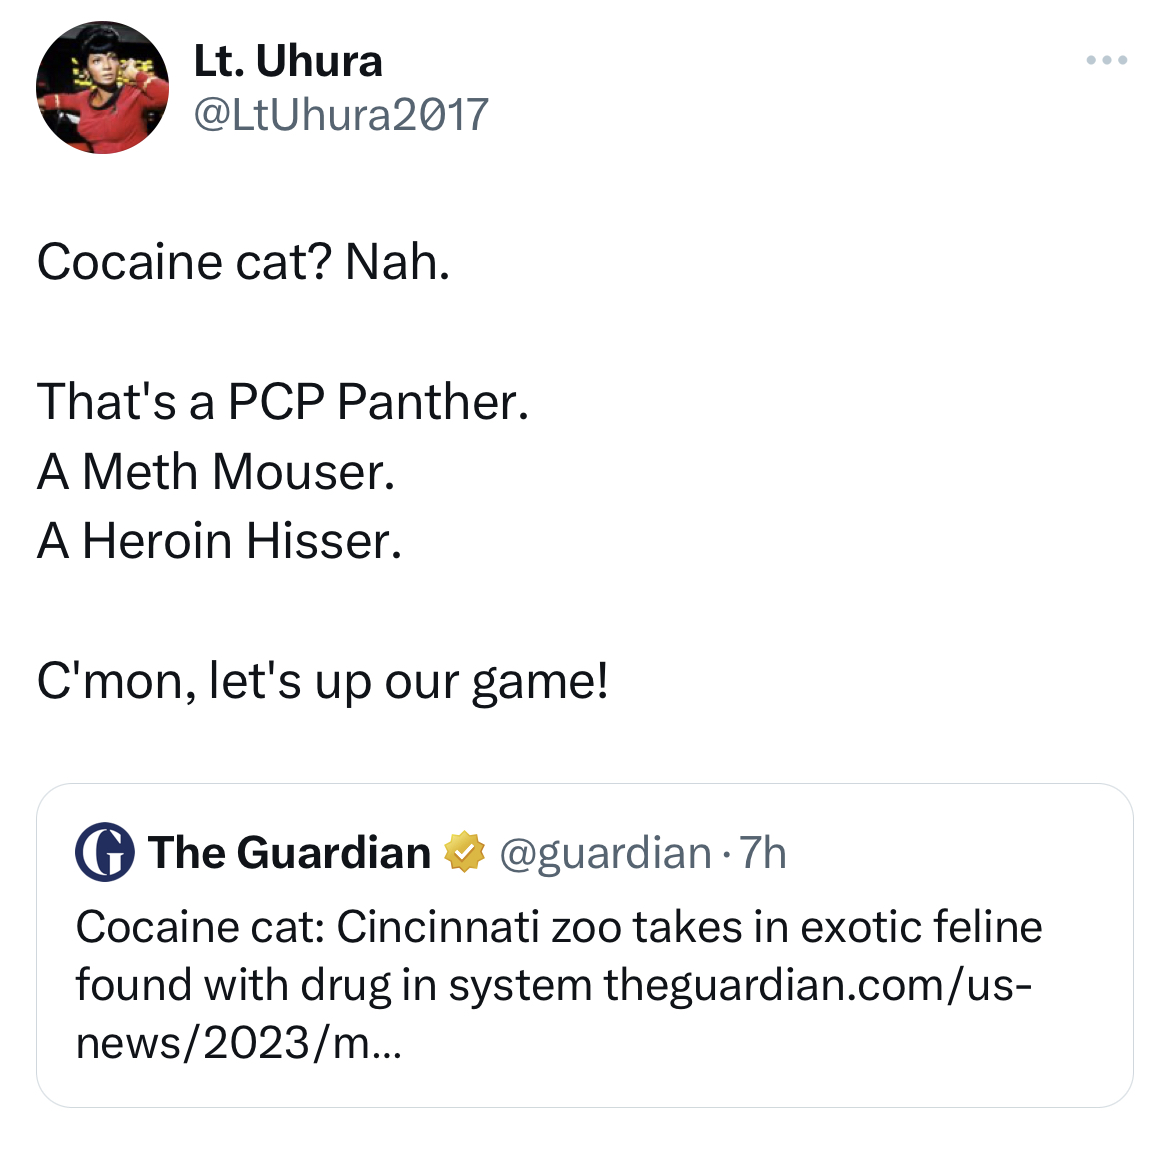 Ohio Cocaine Cat memes - paper - Lt. Uhura Cocaine cat? Nah. That's a Pcp Panther. A Meth Mouser. A Heroin Hisser. C'mon, let's up our game! The Guardian .7h Cocaine cat Cincinnati zoo takes in exotic feline found with drug in system theguardian.comus new